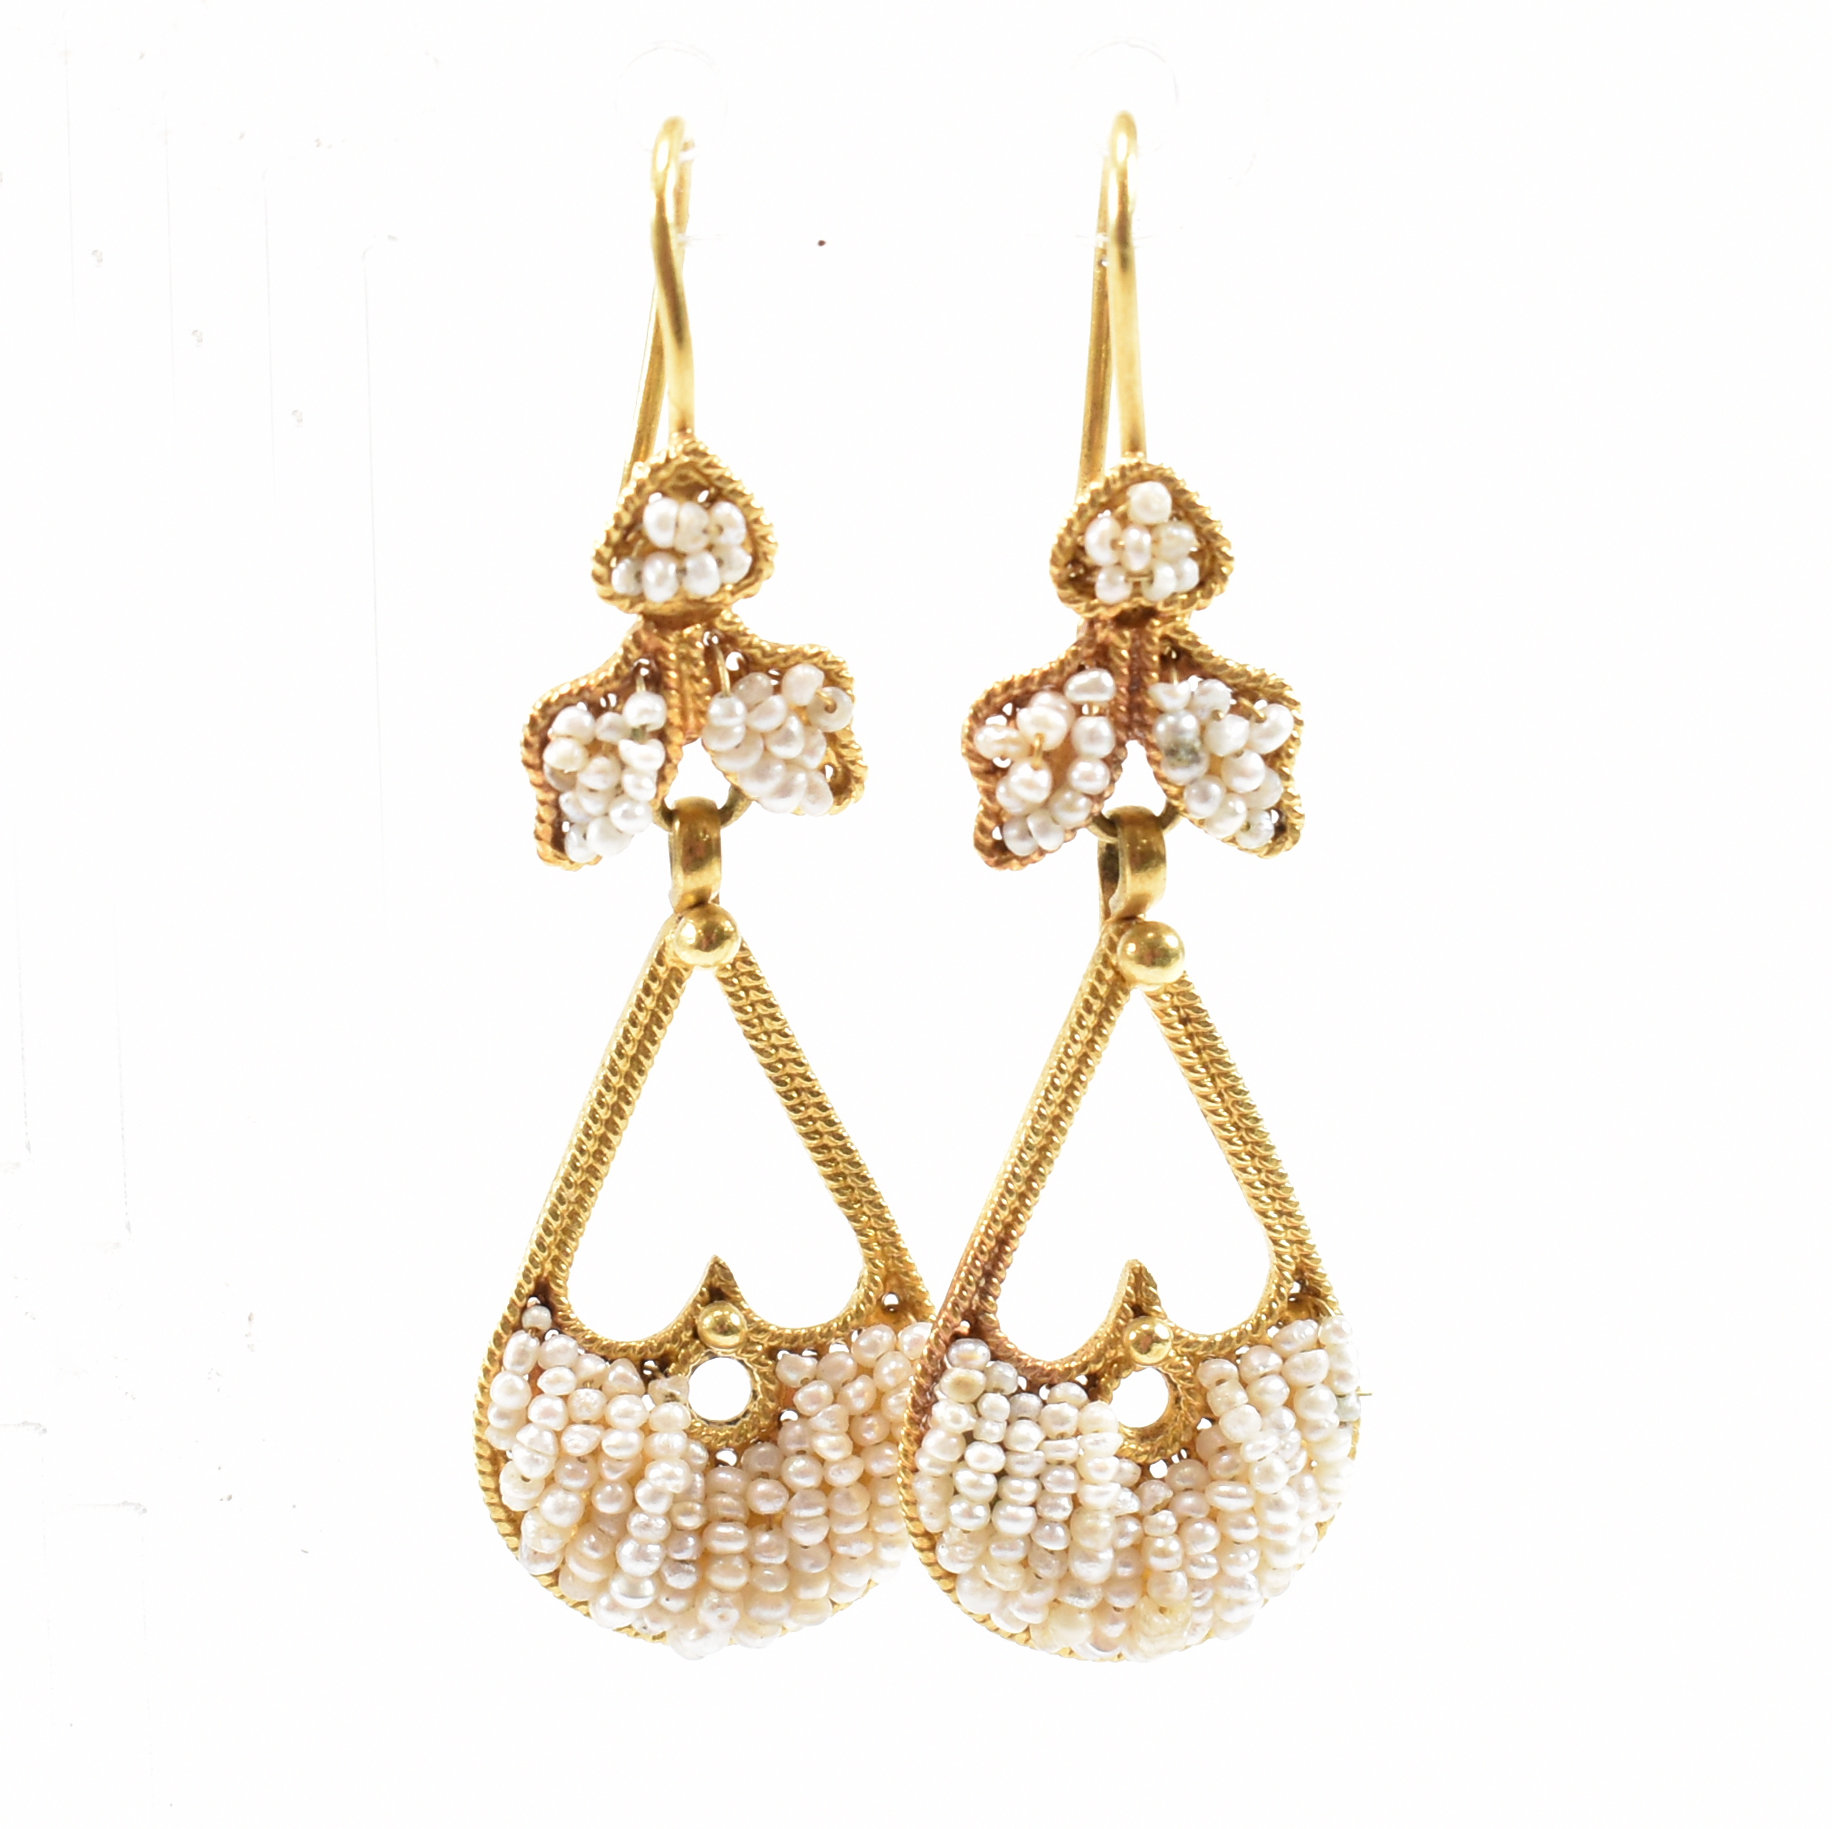 PAIR OF FRENCH 18CT GOLD & SEED PEARL PENDANT EARRINGS - Image 6 of 9